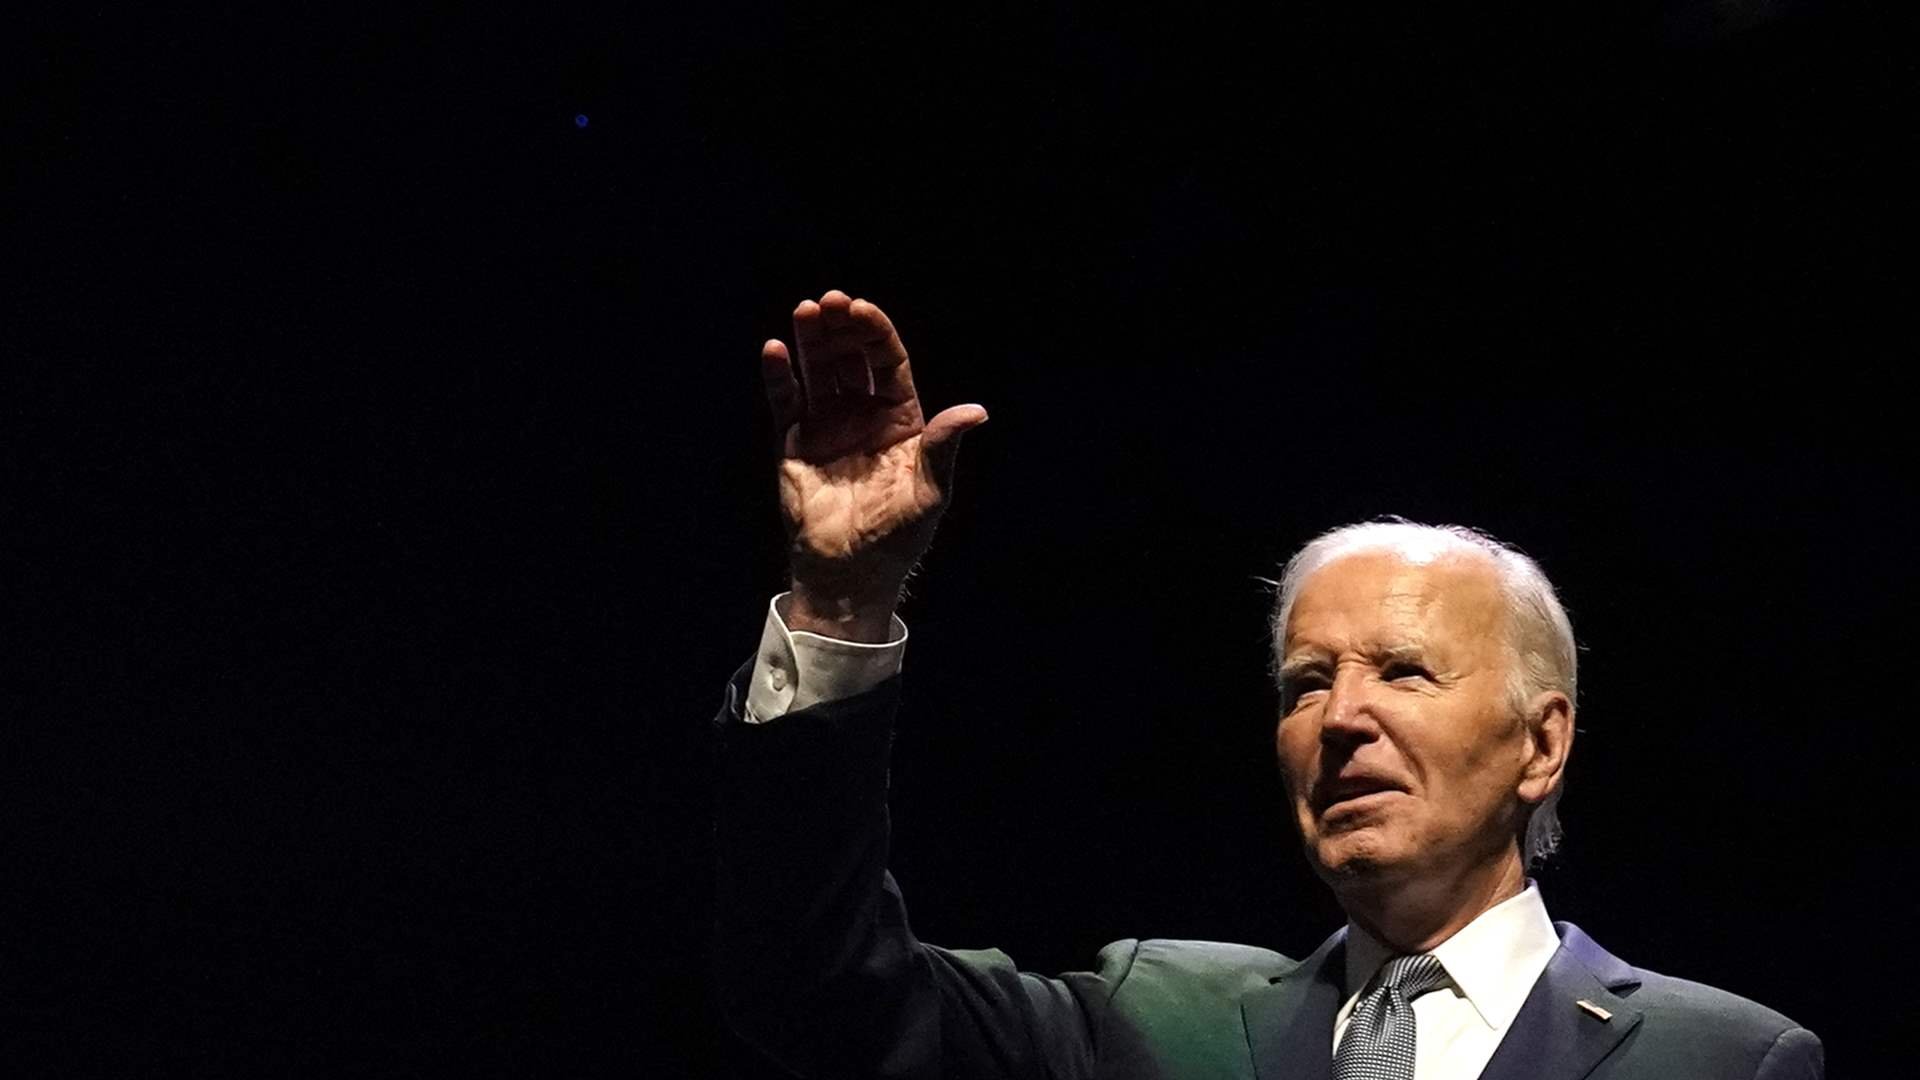 Biden begins to accept he may have to drop out of race: sources tell New York Times